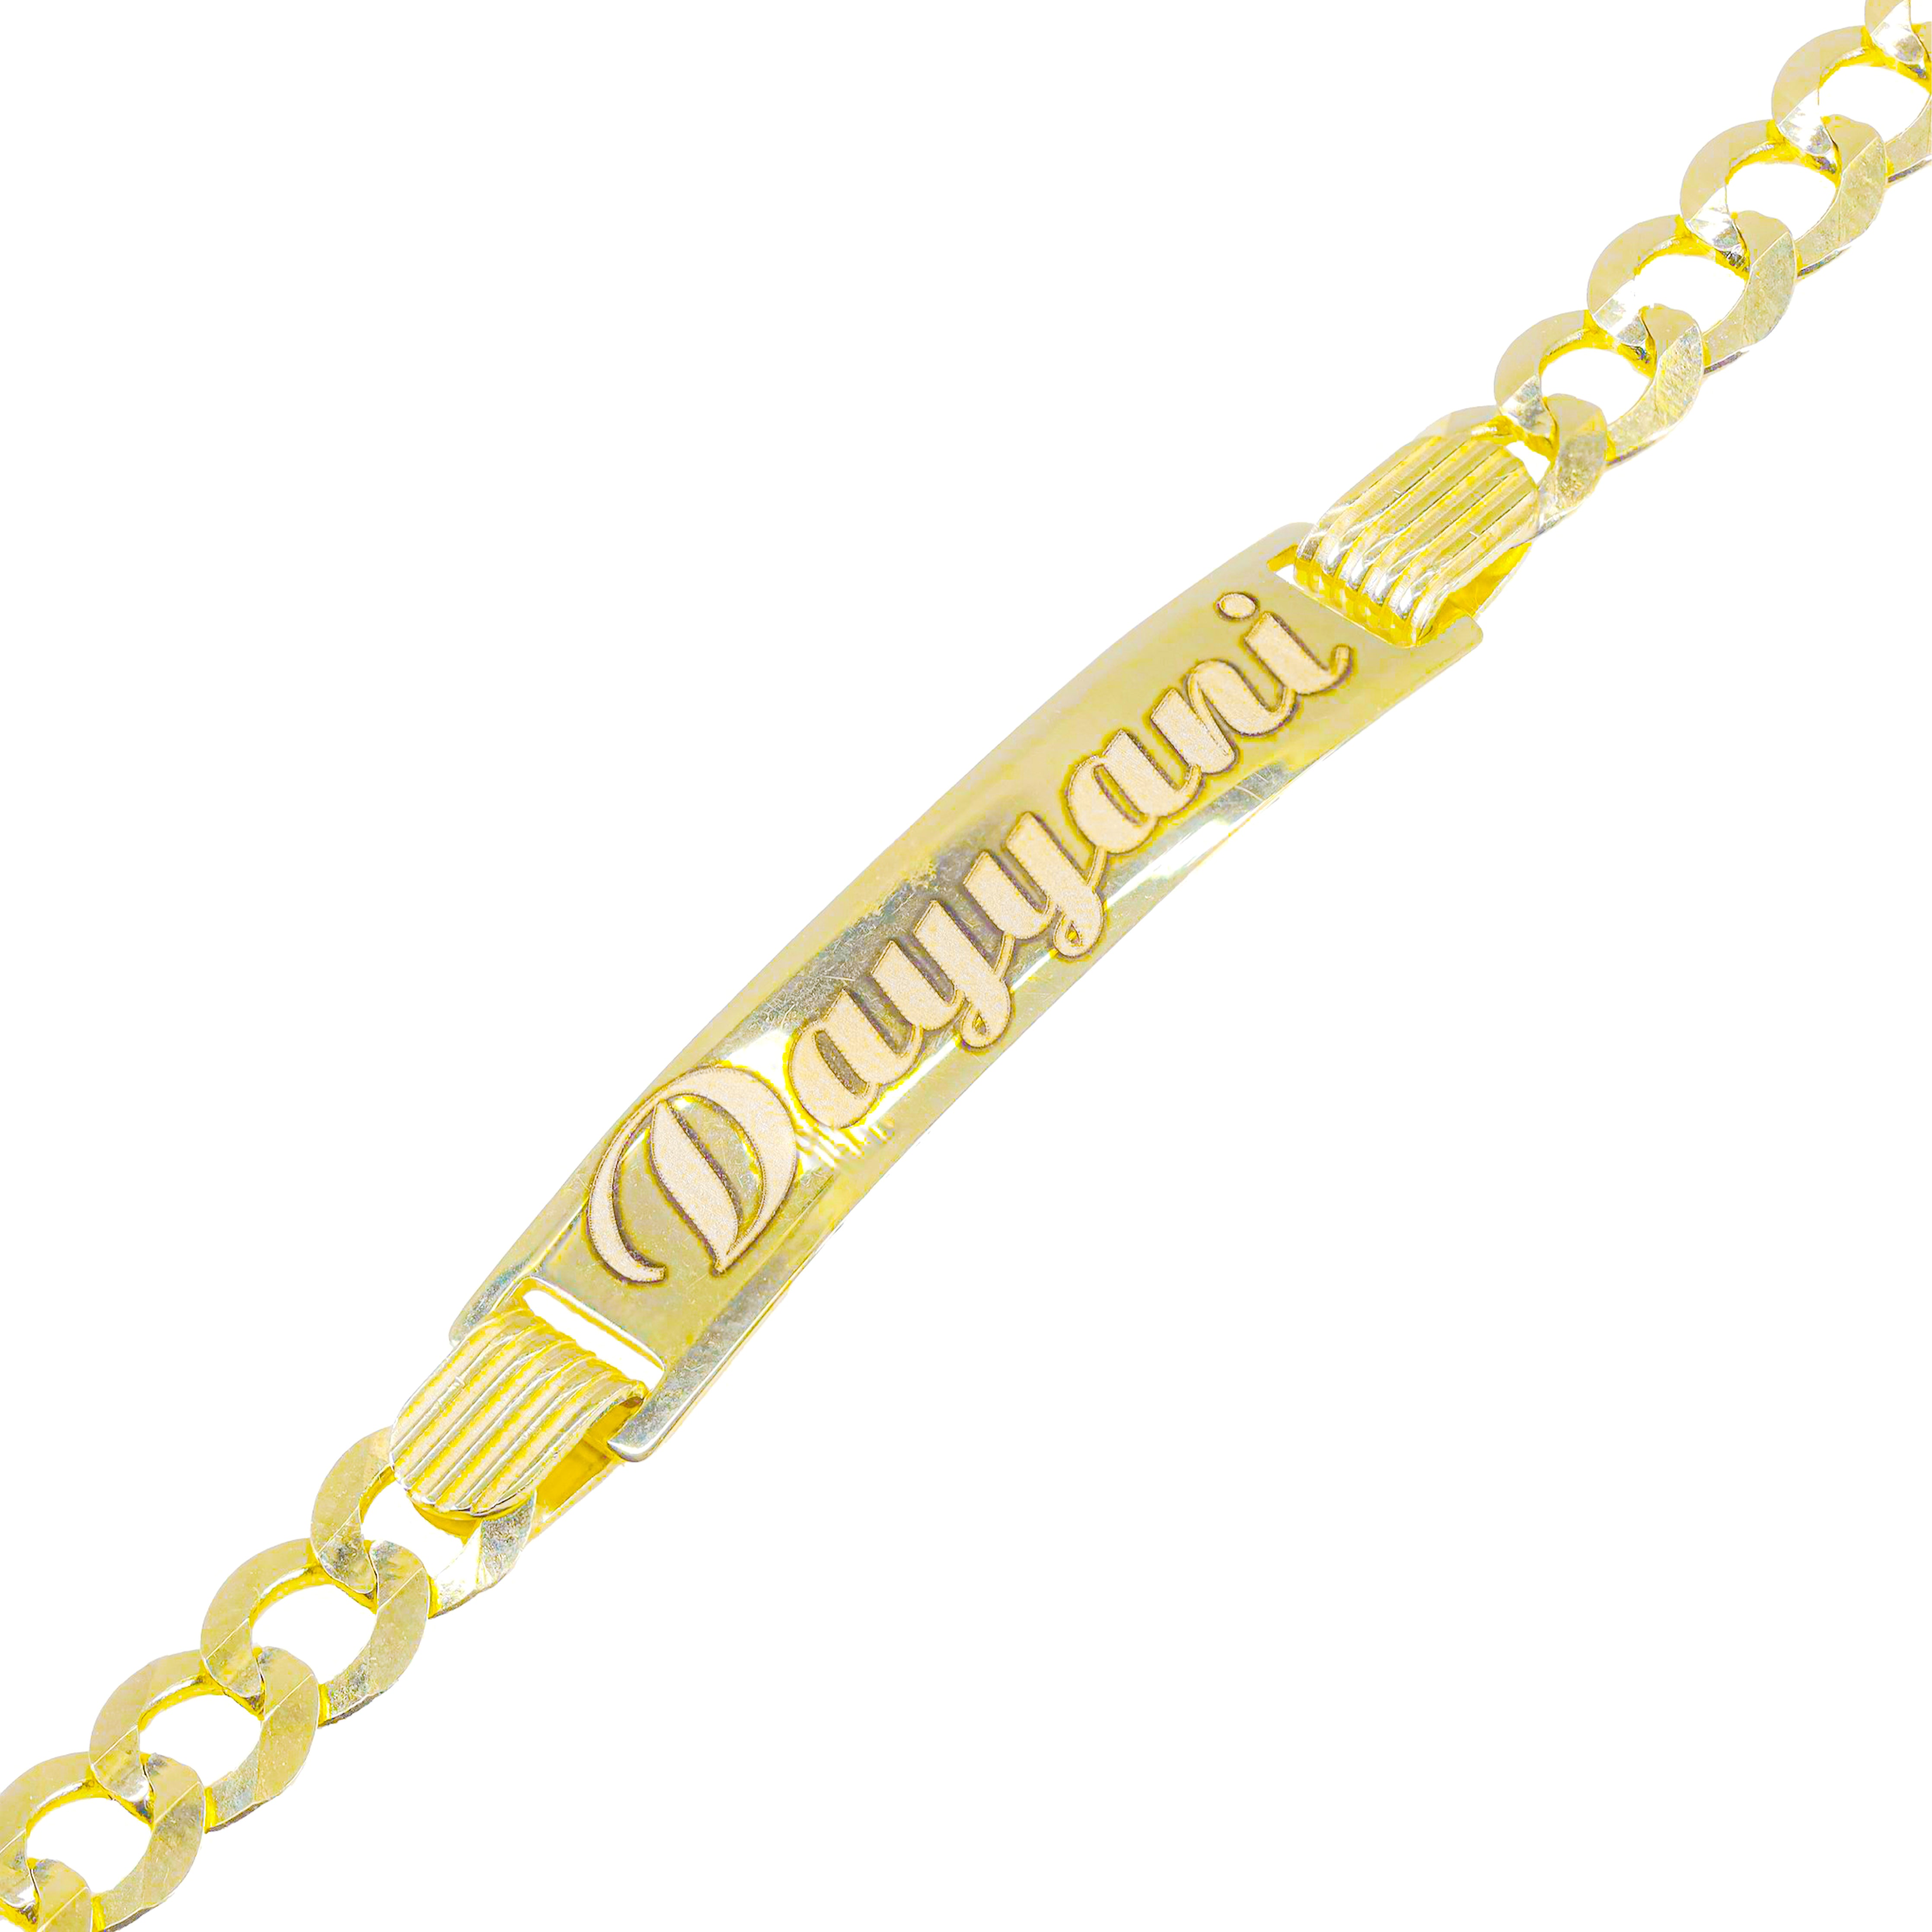 14KT Solid Yellow Gold ID Tag Bracelet